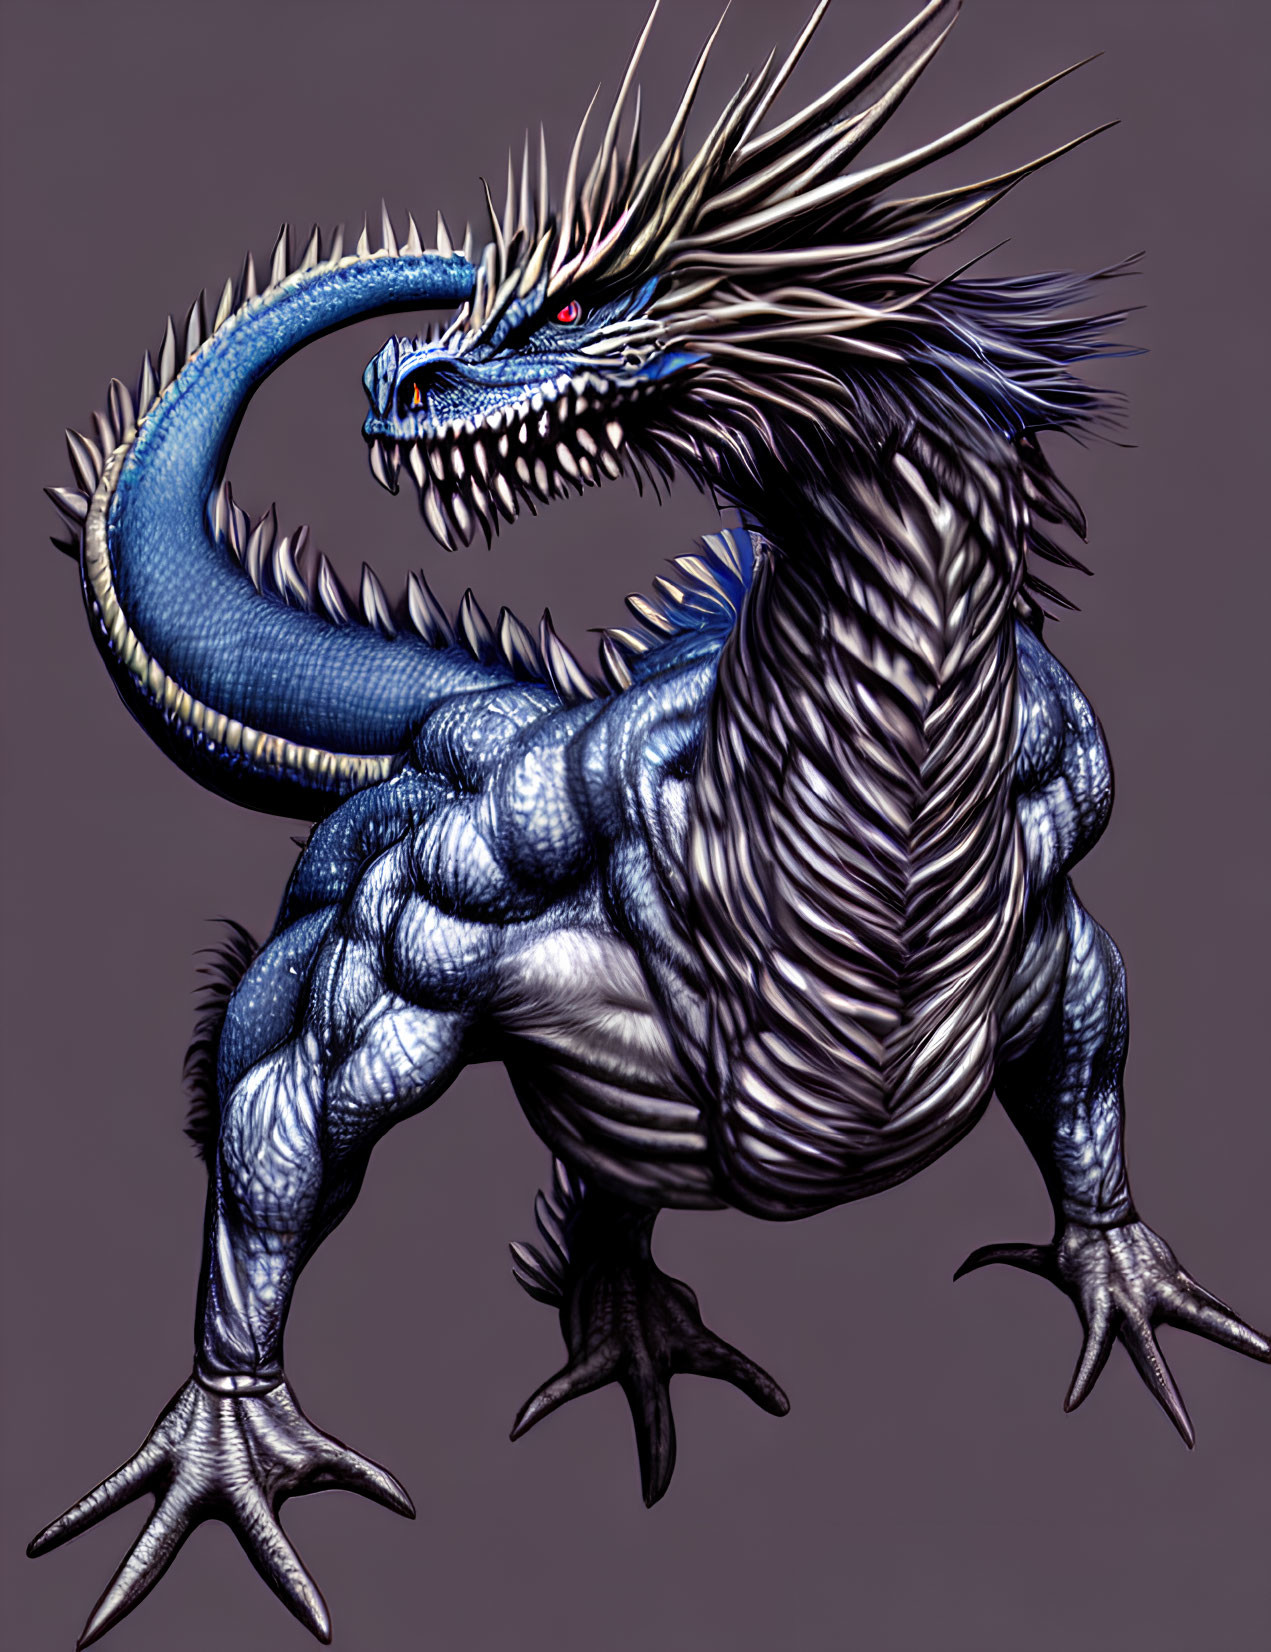 Blue-scaled muscular dragon with sharp claws and spiky hair